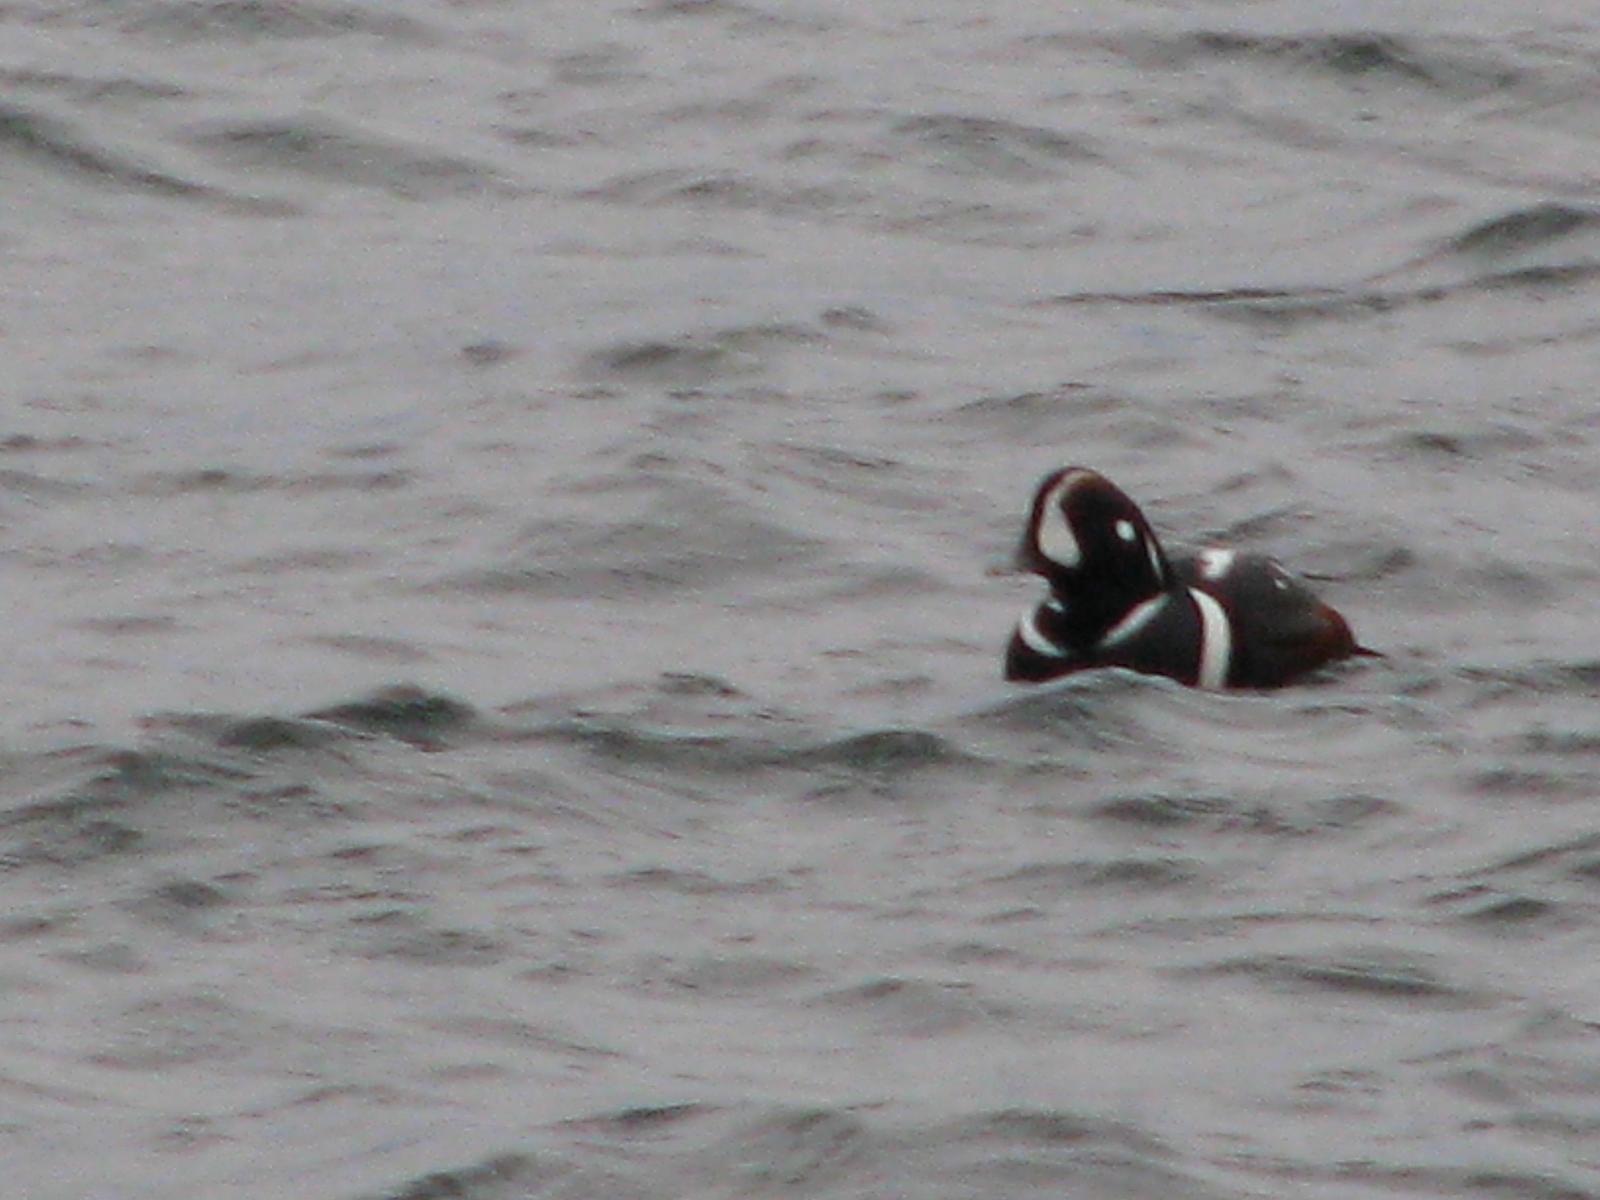 Harlequin Duck Photo by Ted Goshulak